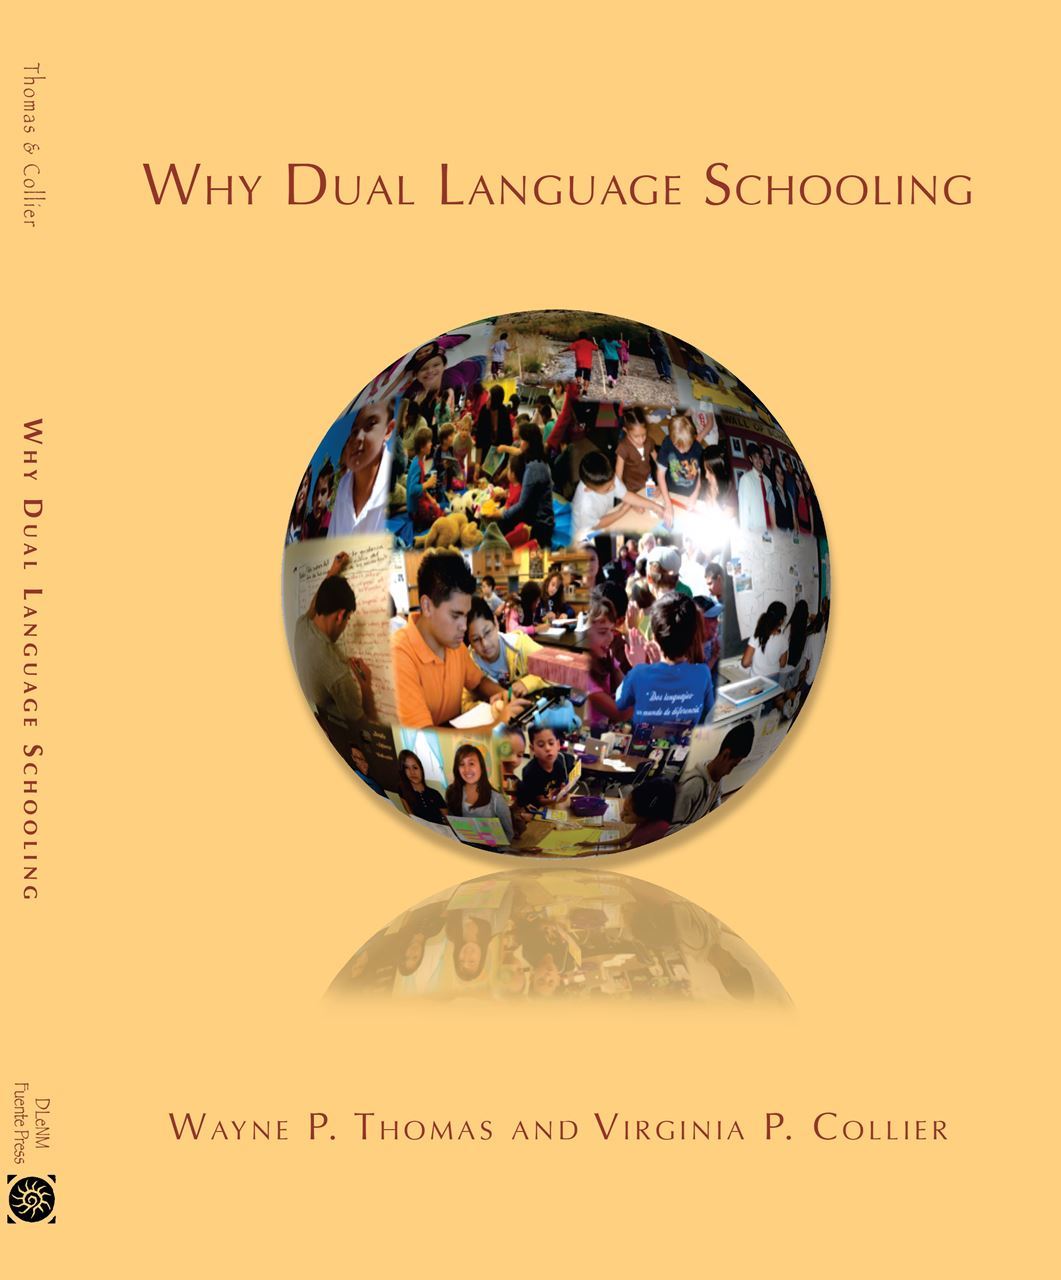 Why Dual Language Schooling eBook + Video